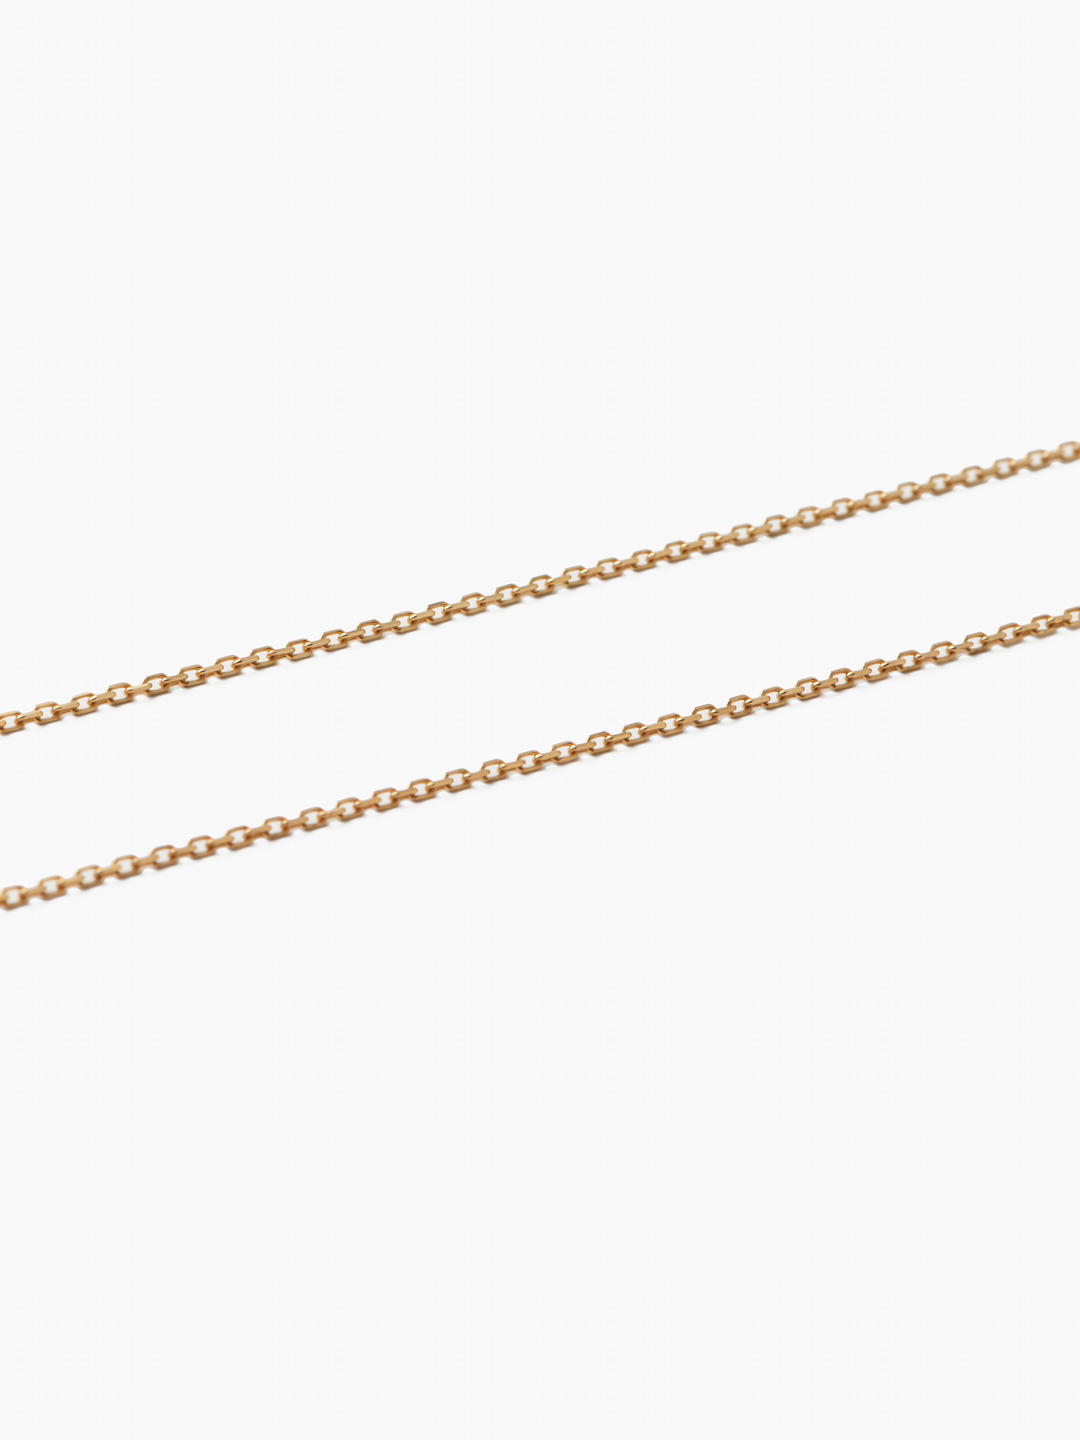 Poppy Necklace Gold - Yellow Gold